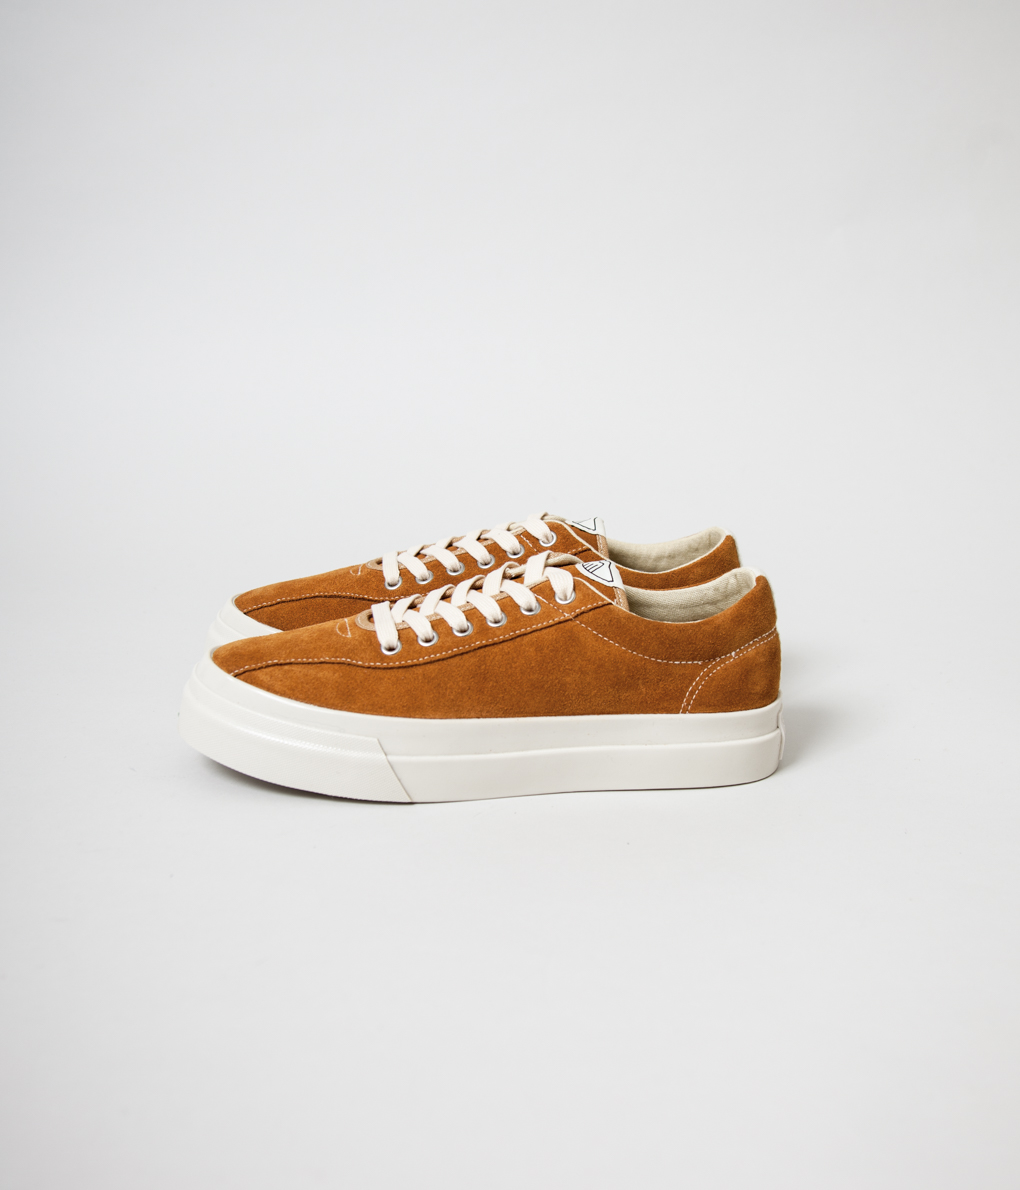 New Arrival “S.W.C (Stepney Workers Club) /DELLOW SUEDE SNEAKERS 